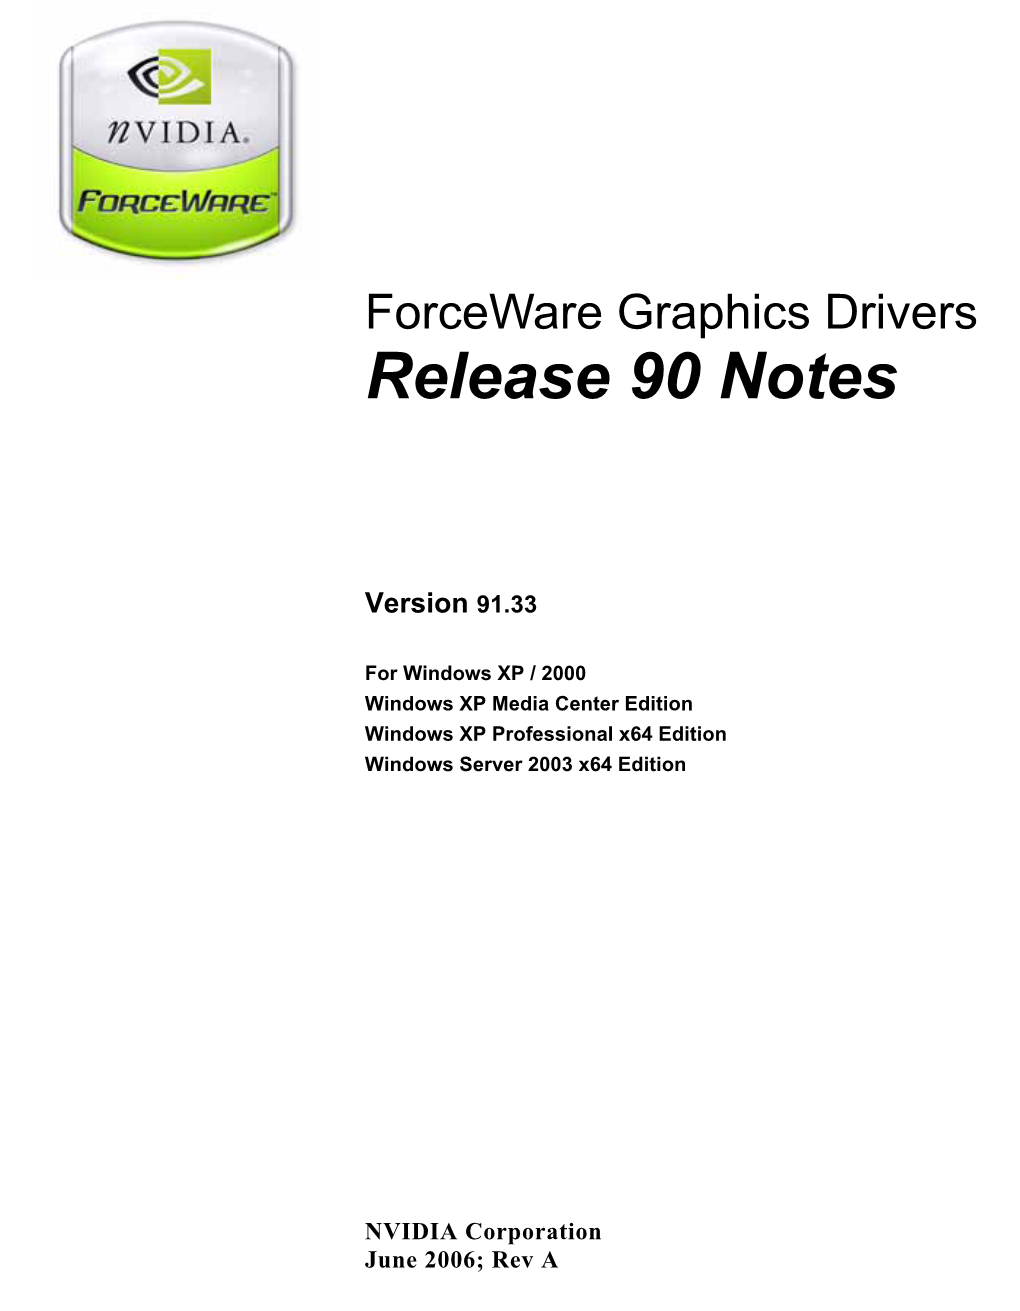 Forceware Graphics Drivers Release 90 Notes